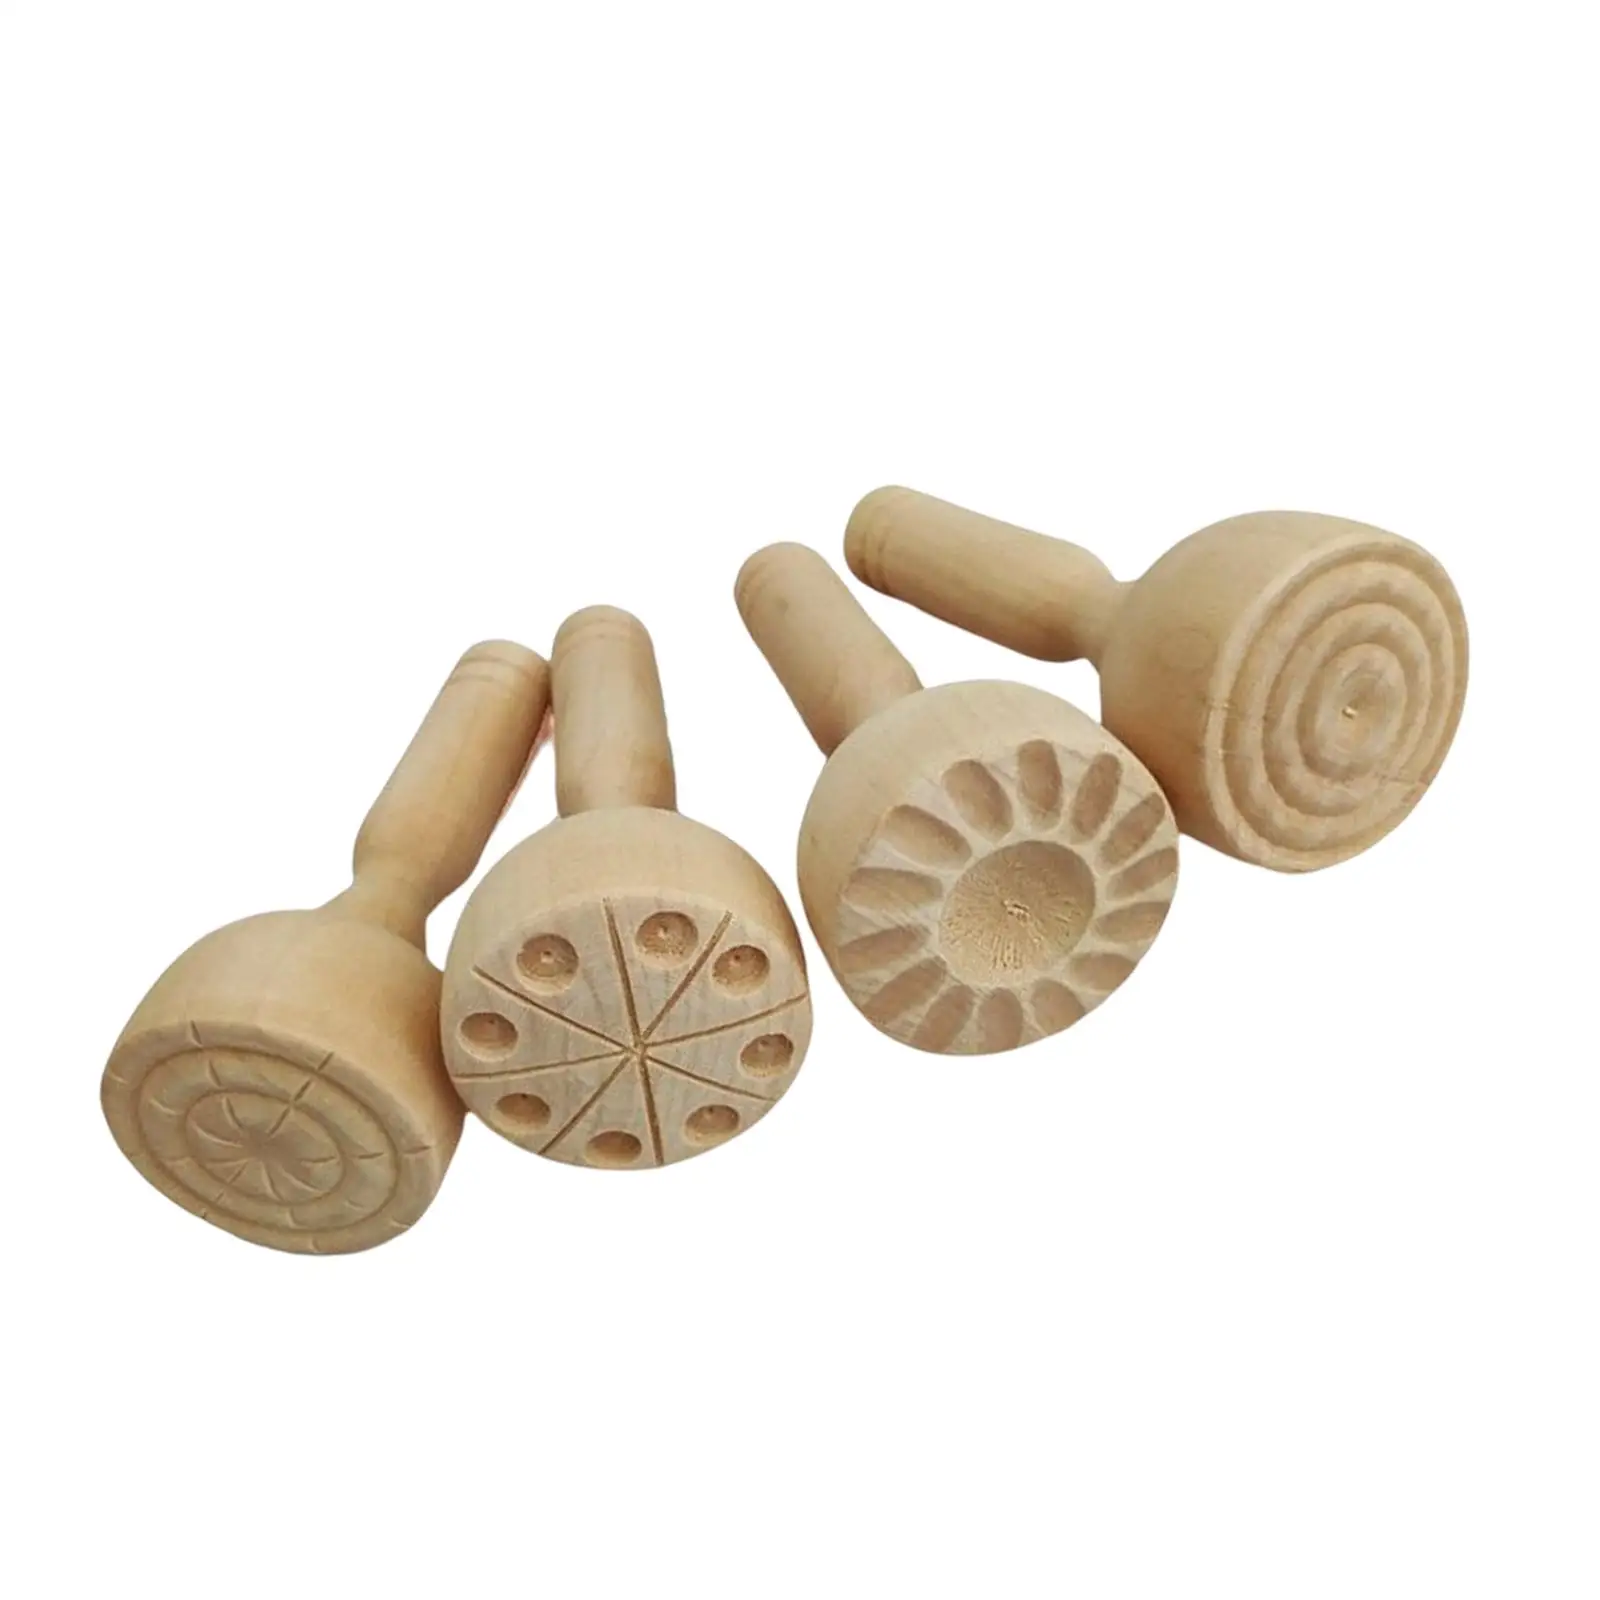 4Pcs Traditional Wooden seal Moulds Making Molds Press Molds Tools mould Supplies for Art Craft Activity Supplies